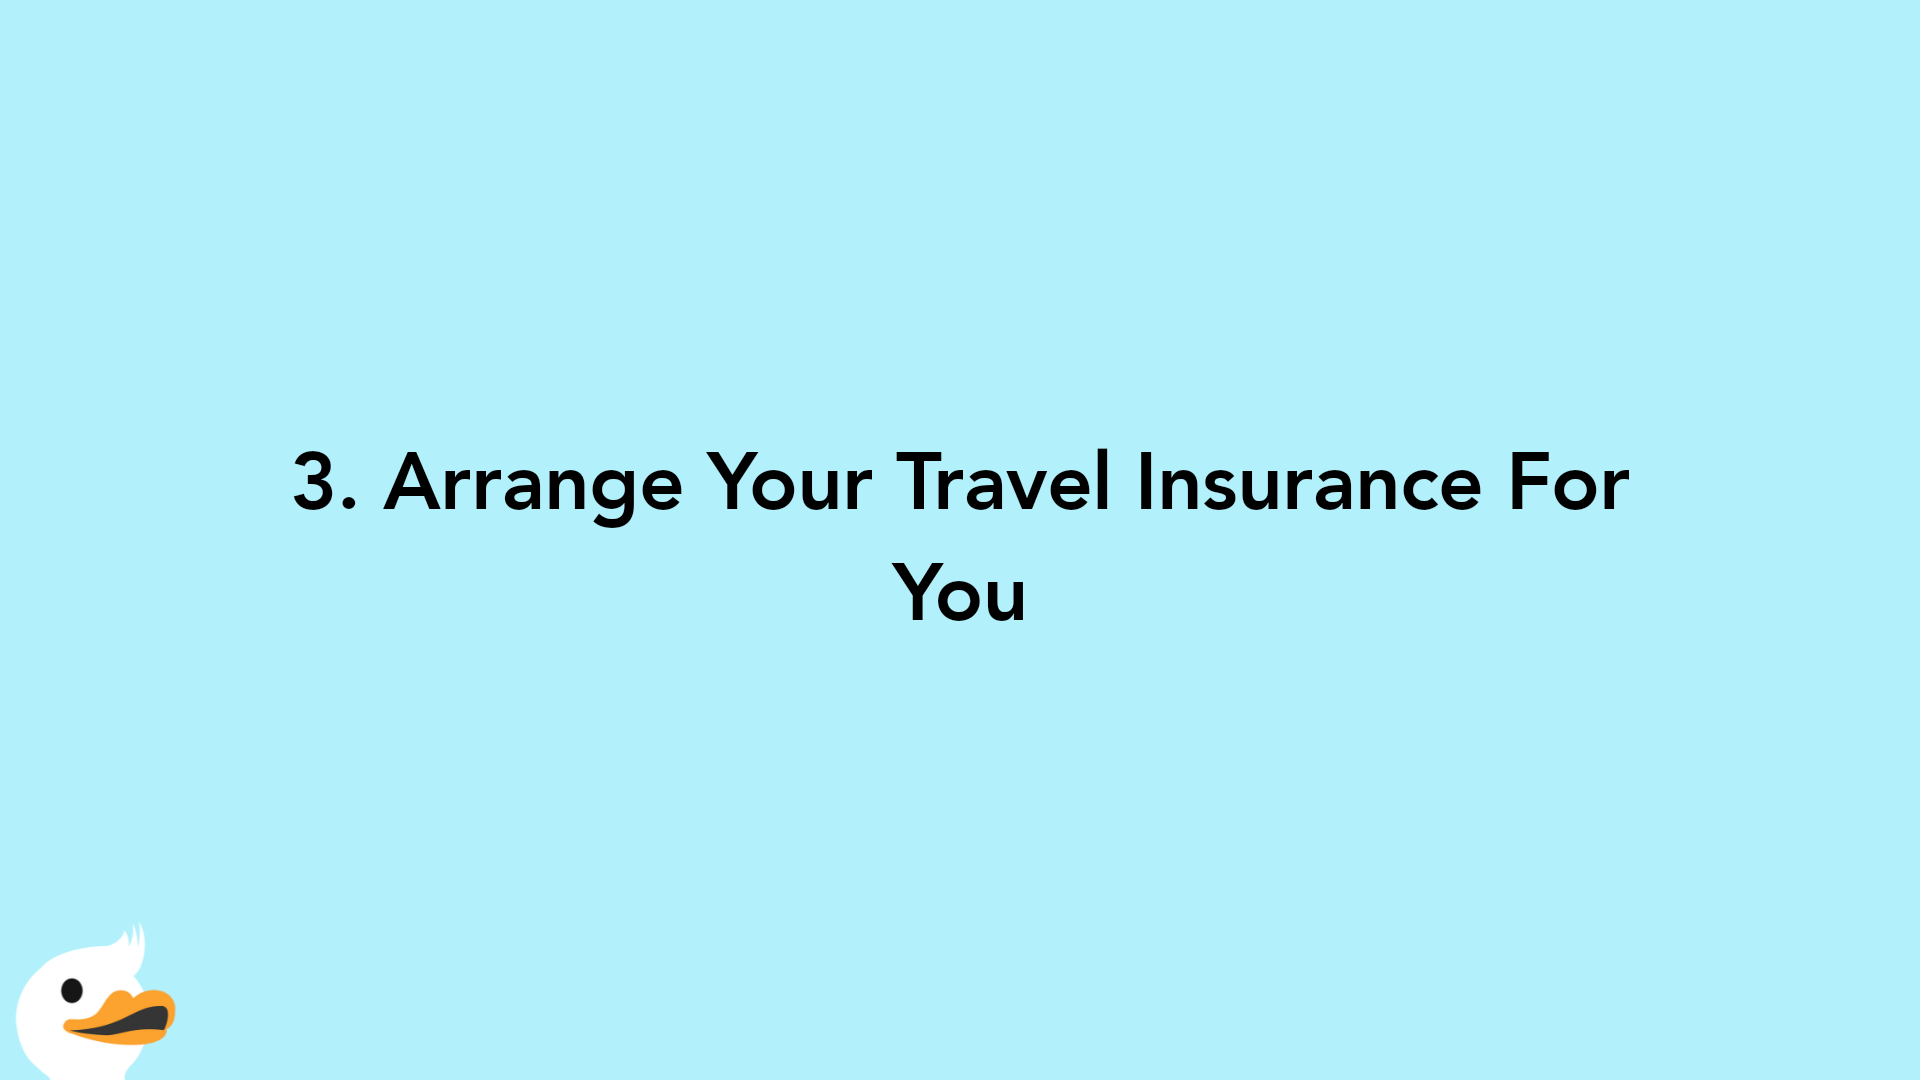 3. Arrange Your Travel Insurance For You